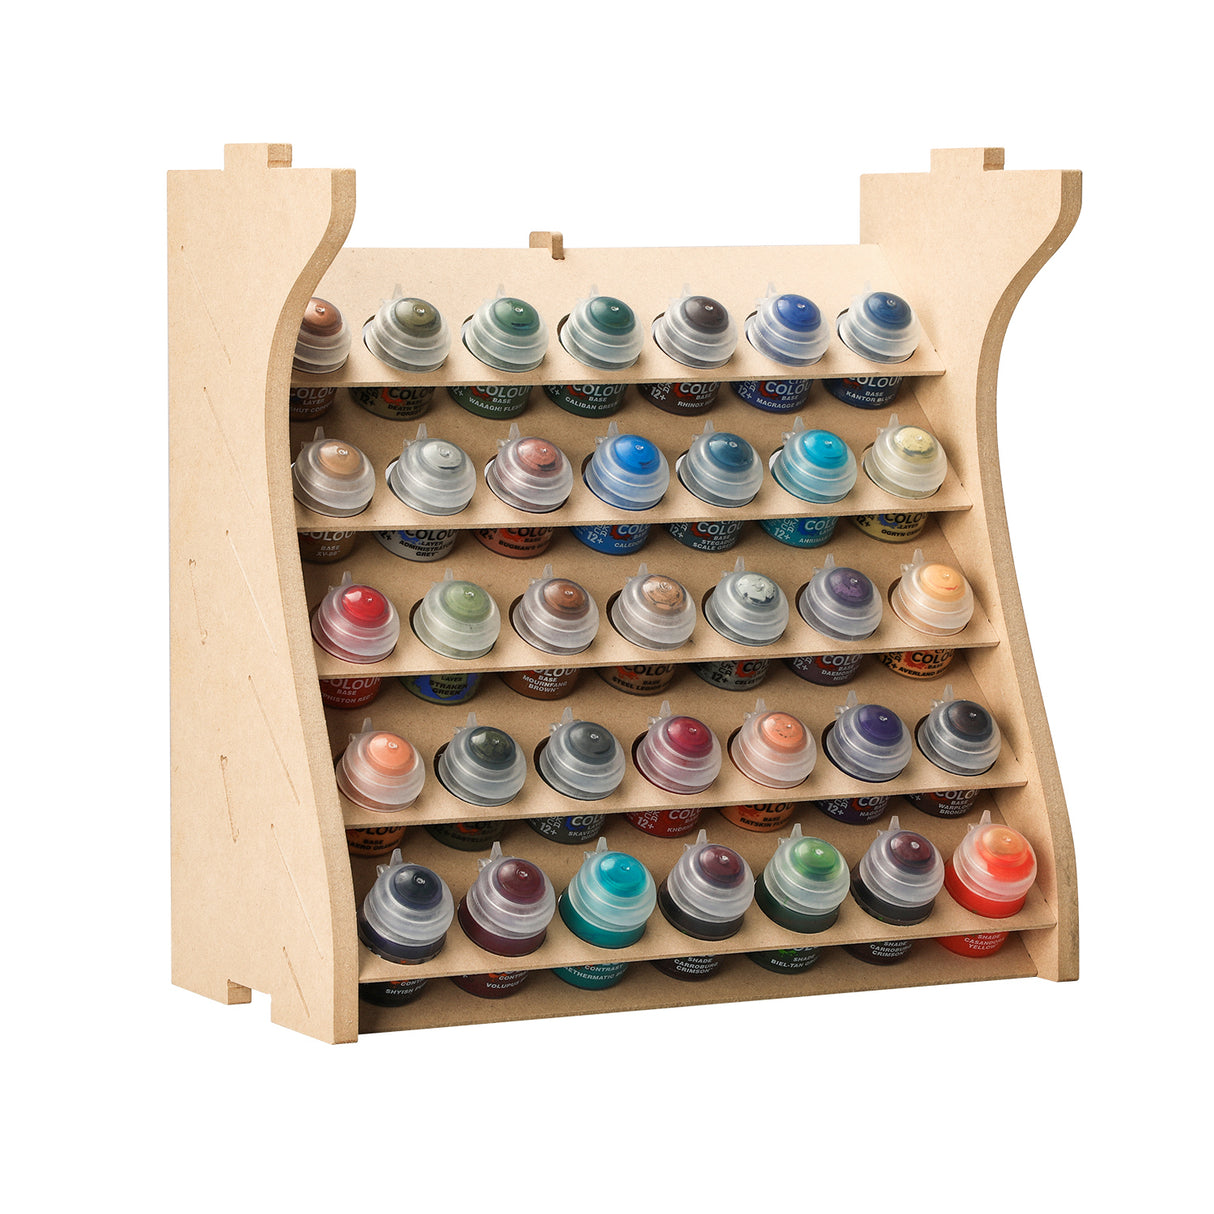 Vallejo Paint Stands - Paint display and work station with